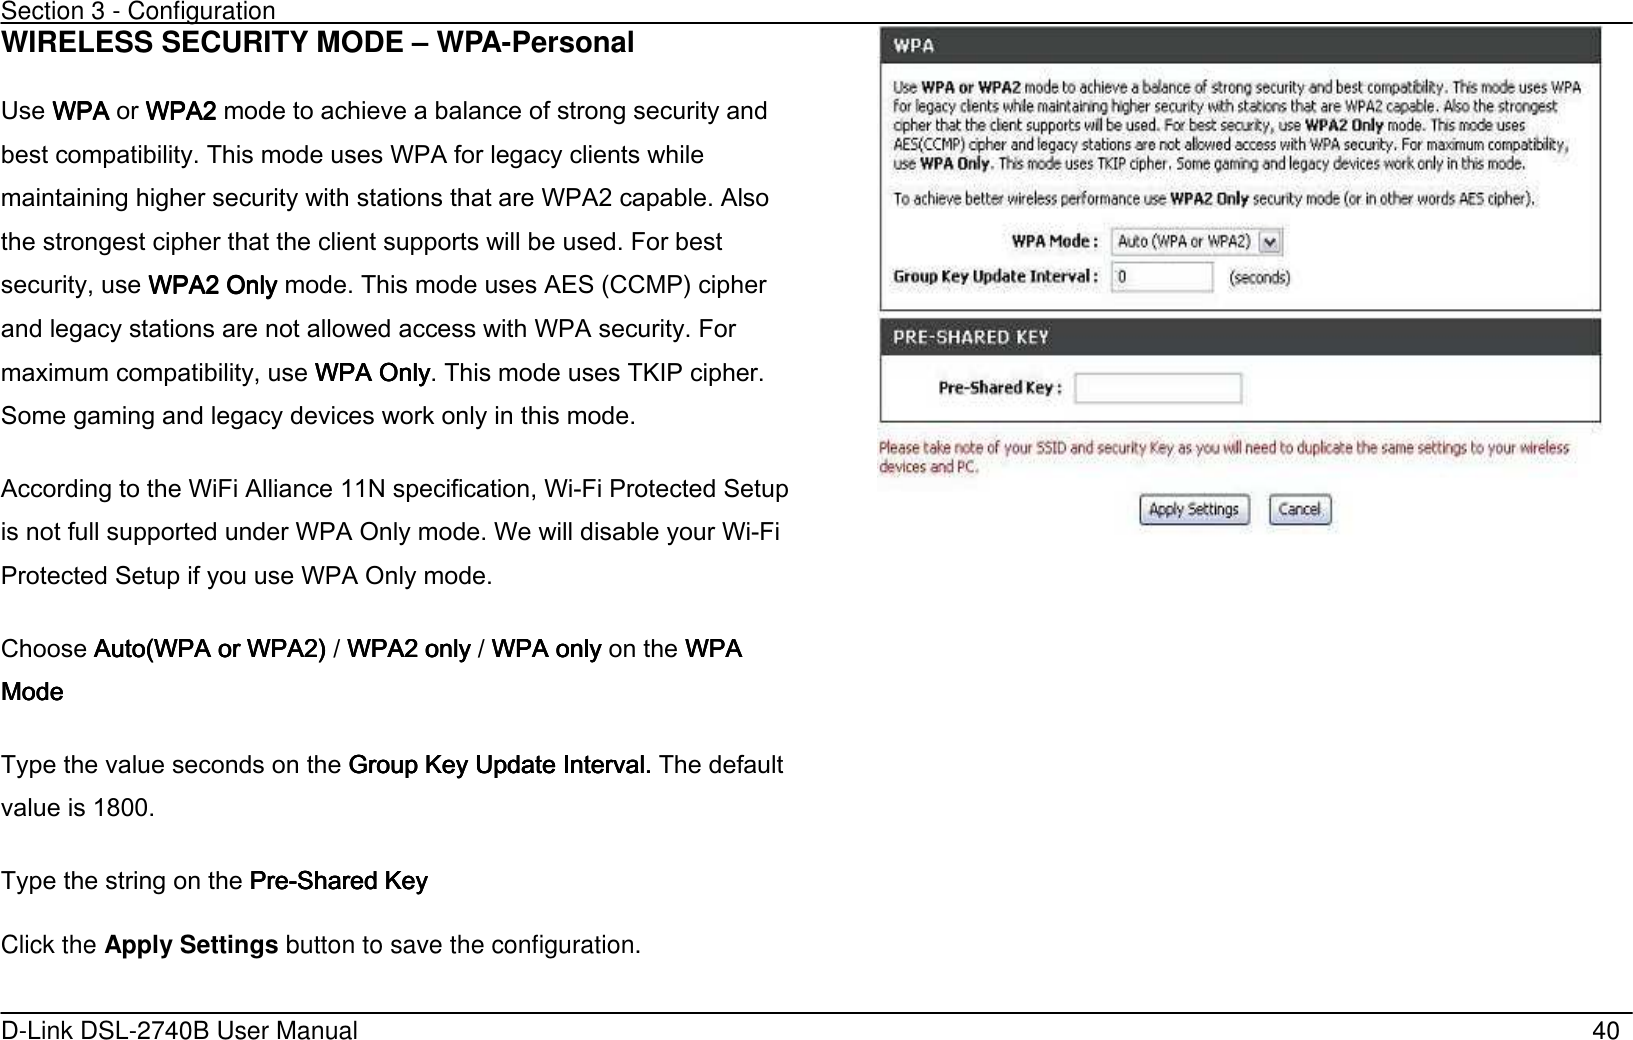 Section 3 - Configuration   D-Link DSL-2740B User Manual                                                  40 WIRELESS SECURITY MODE – WPA-Personal Use WPA WPA WPA WPA or WPA2 WPA2 WPA2 WPA2 mode to achieve a balance of strong security and best compatibility. This mode uses WPA for legacy clients while maintaining higher security with stations that are WPA2 capable. Also the strongest cipher that the client supports will be used. For best security, use WPA2 OnlyWPA2 OnlyWPA2 OnlyWPA2 Only mode. This mode uses AES (CCMP’ cipher and legacy stations are not allowed access with WPA security. For maximum compatibility, use WPA OnlyWPA OnlyWPA OnlyWPA Only. This mode uses TKIP cipher. Some gaming and legacy devices work only in this mode. According to the WiFi Alliance 11N specification, Wi-Fi Protected Setup is not full supported under WPA Only mode. We will disable your Wi-Fi Protected Setup if you use WPA Only mode. Choose Auto(WPA or WPA2’Auto(WPA or WPA2’Auto(WPA or WPA2’Auto(WPA or WPA2’ / WPA2 onlyWPA2 onlyWPA2 onlyWPA2 only / WPA onlyWPA onlyWPA onlyWPA only    on the WPA WPA WPA WPA ModeModeModeMode         Type the value seconds on the Group Key Update IntervalGroup Key Update IntervalGroup Key Update IntervalGroup Key Update Interval. . . . The default value is 1800. Type the string on the PrePrePrePre----Shared KeyShared KeyShared KeyShared Key Click the Apply Settings button to save the configuration.    